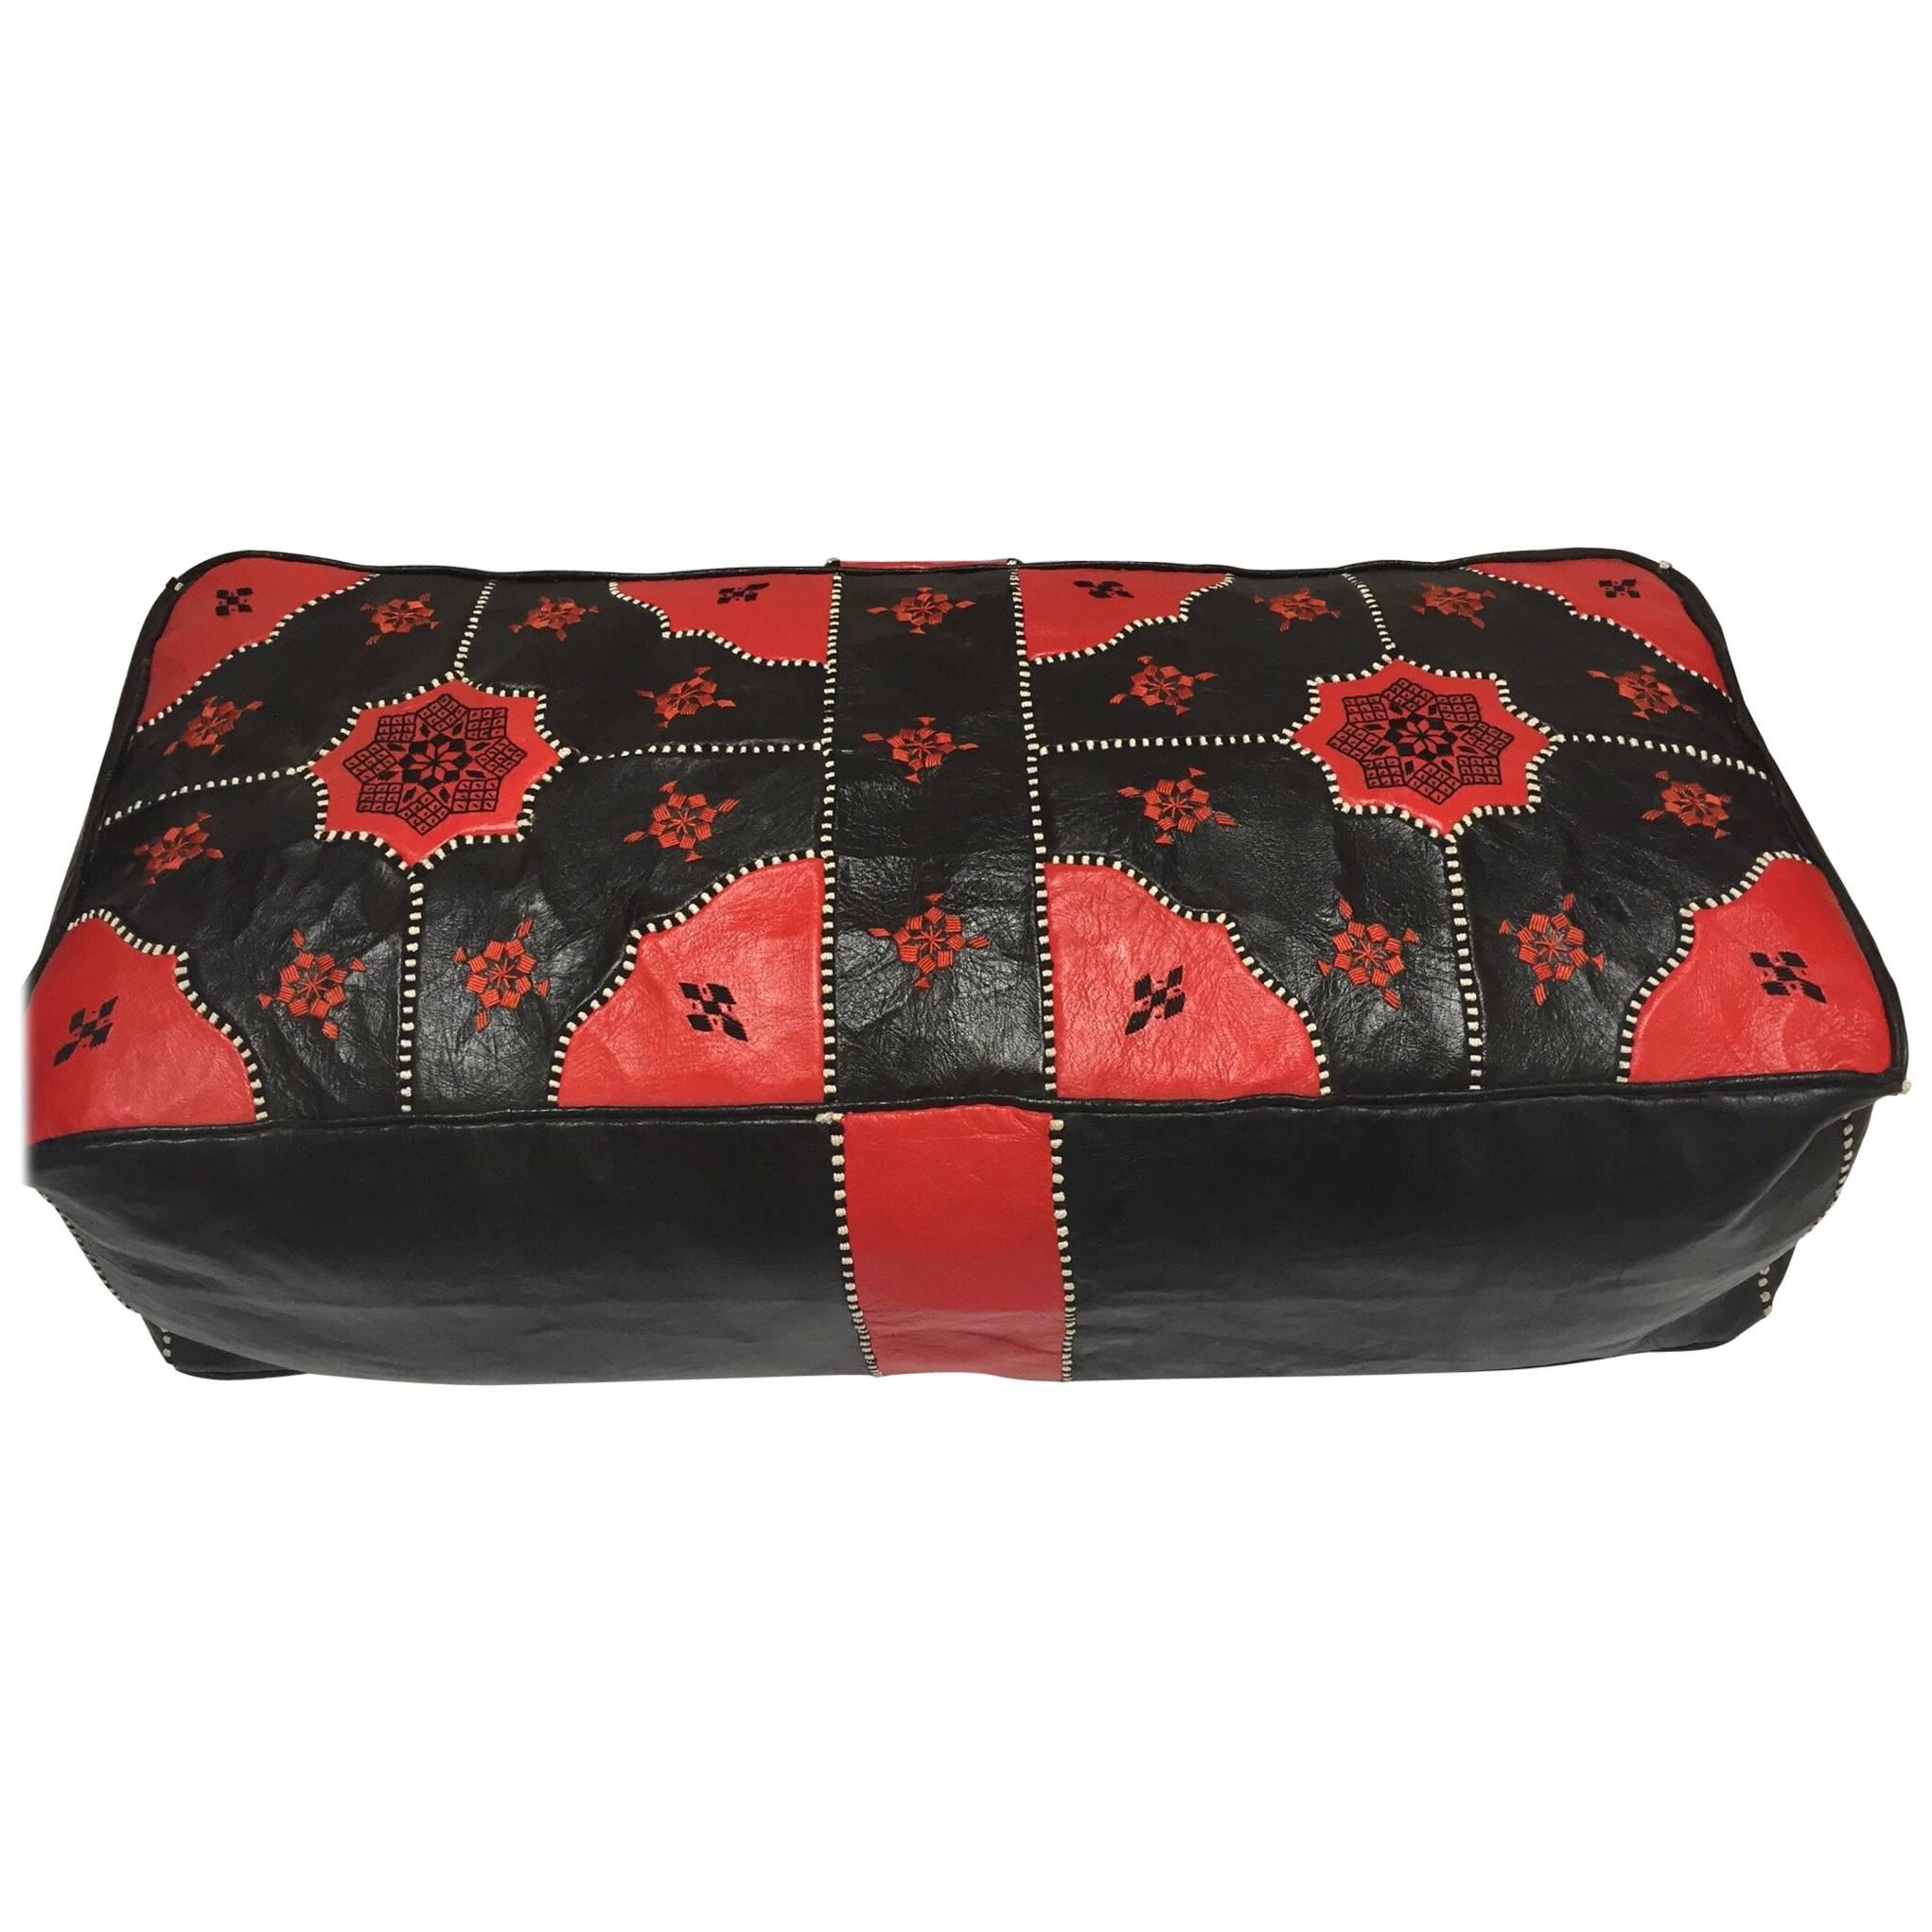 Large vintage red and black hand tooled leather Moroccan ottoman.
Rectangular shape pouf in red and black leather embroidered with black and white silk threads.
Handcrafted by skilled artisans in Marrakech, Morocco, 
circa 1970s.